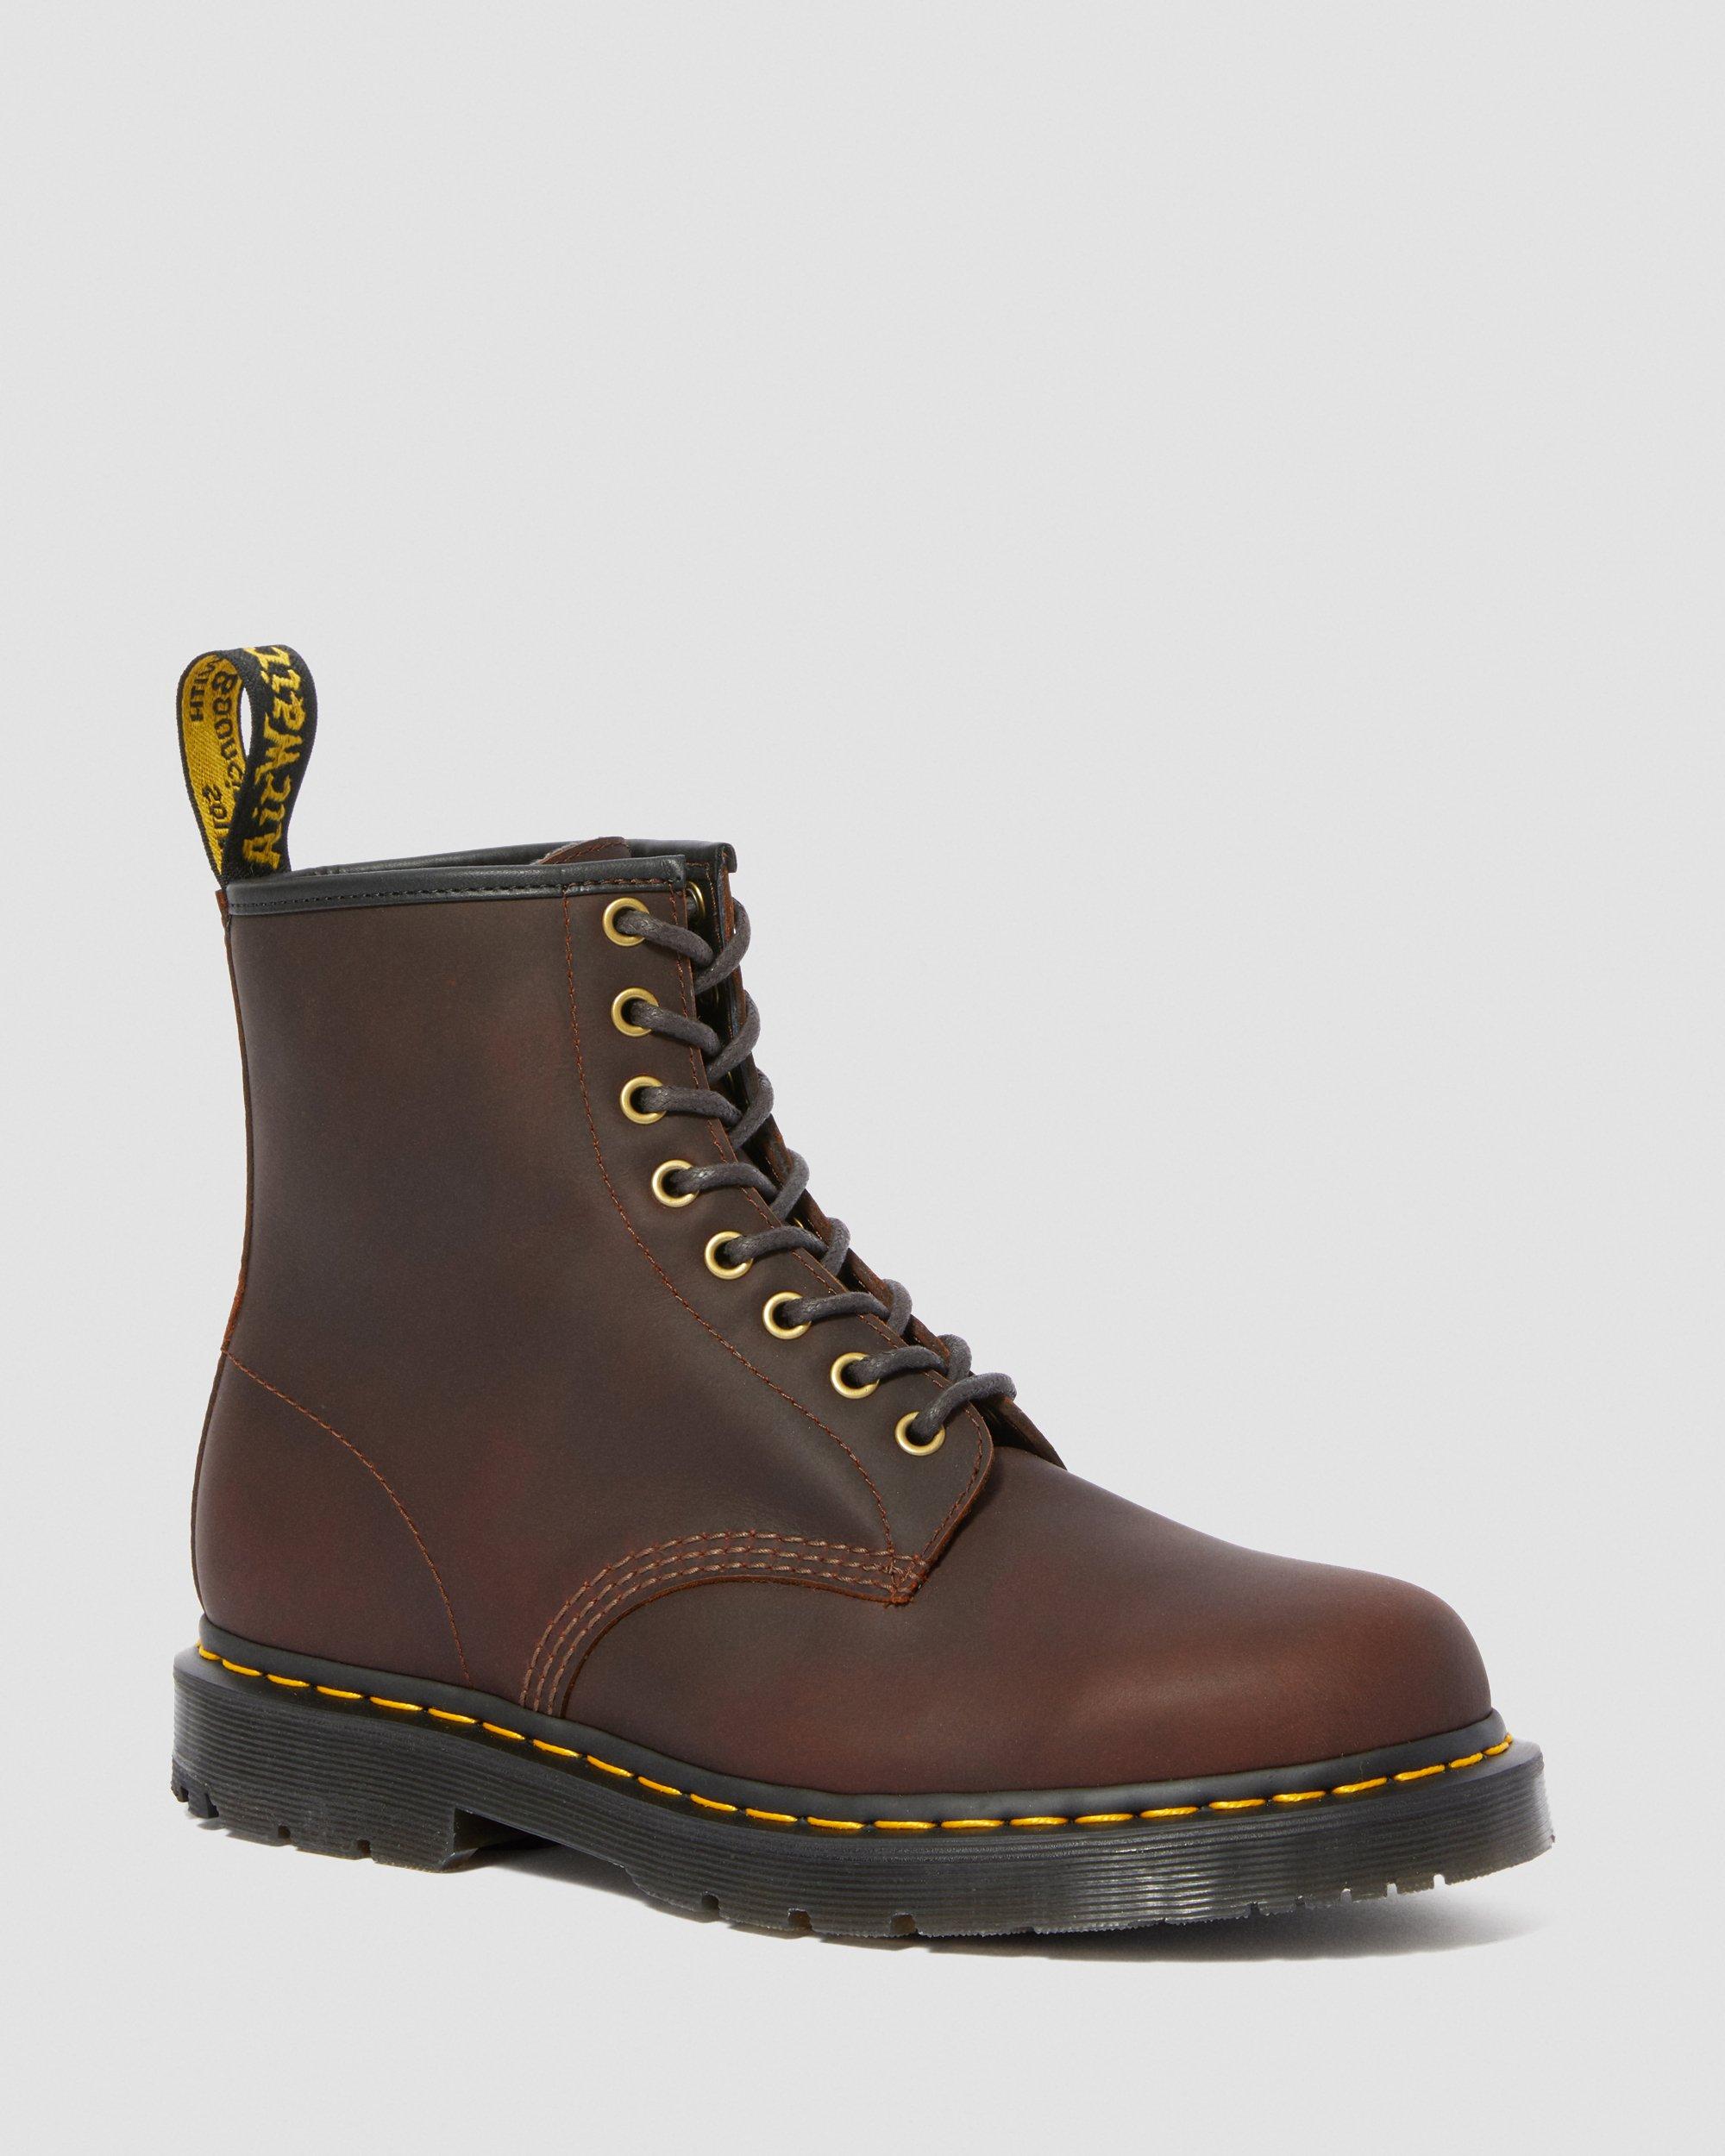 WINTERGRIP LACE UP BOOTS | Dr. Martens 